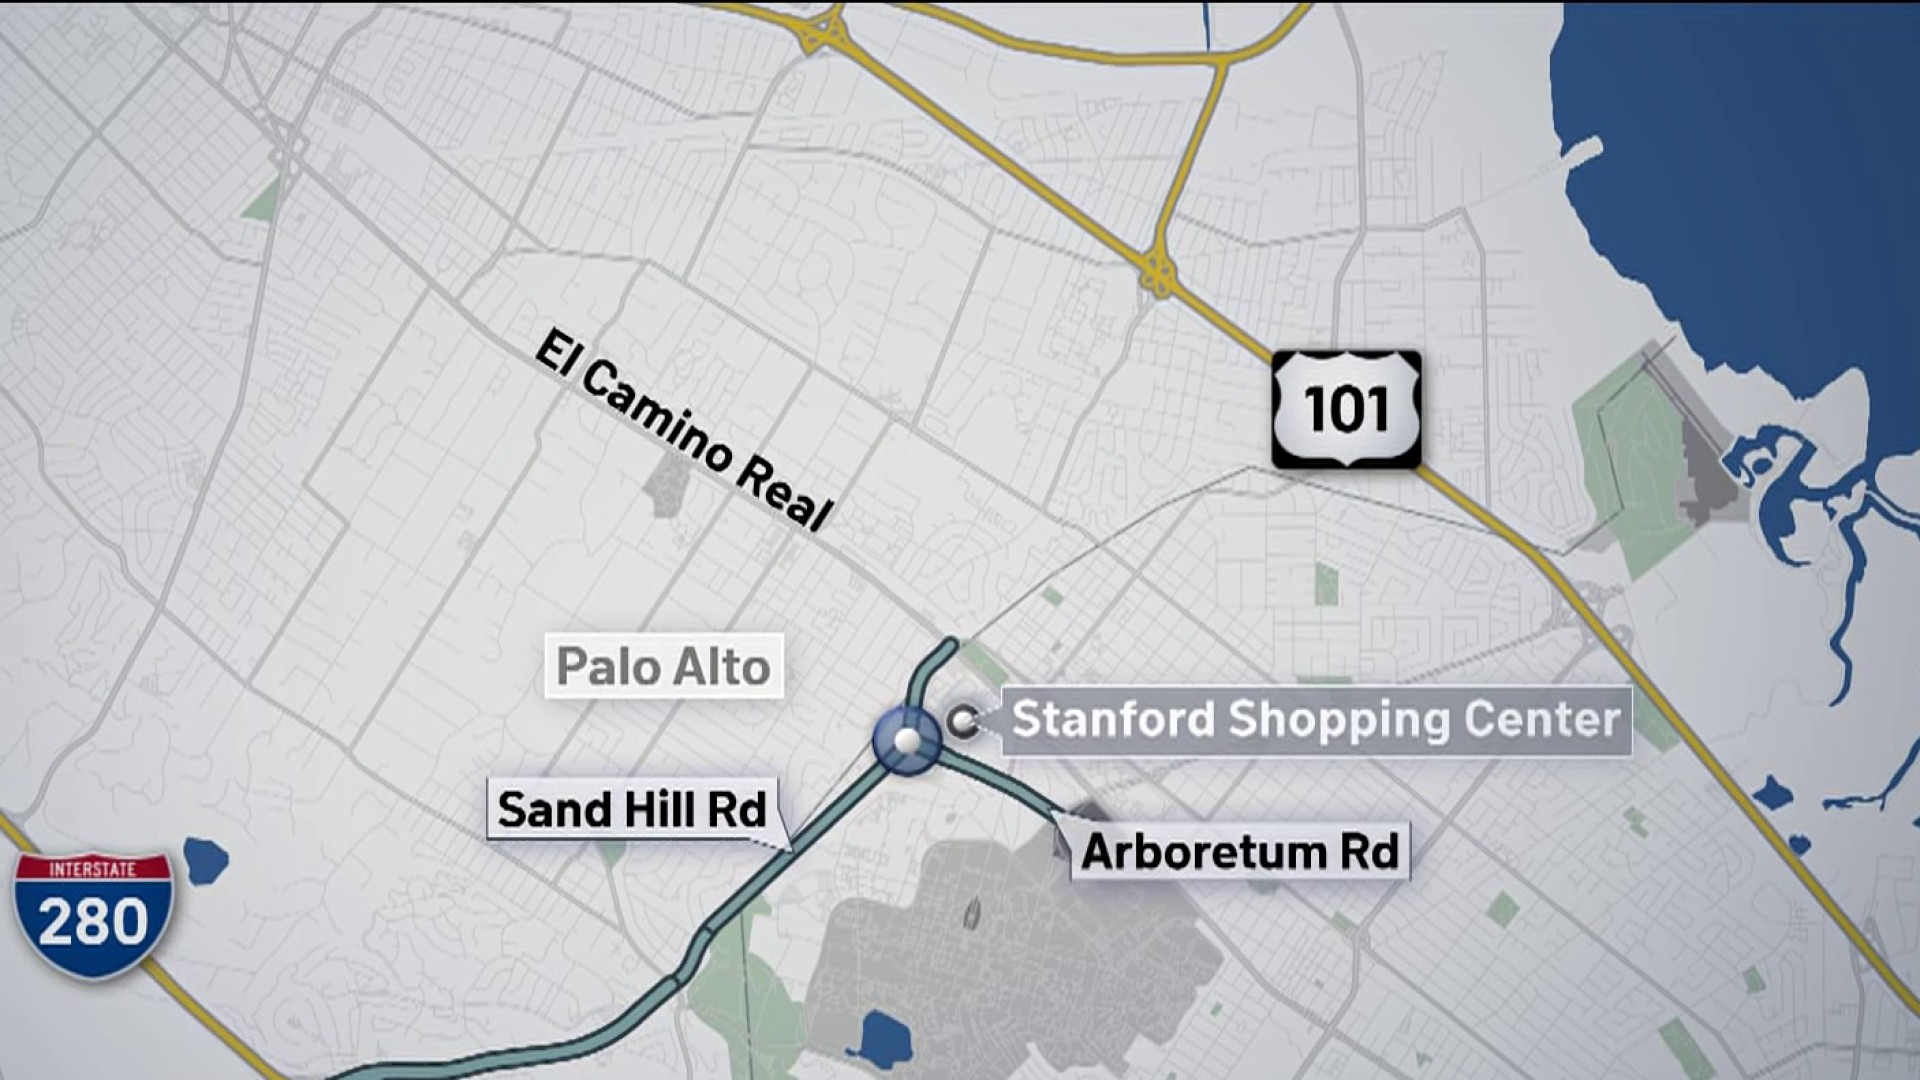 CHP to patrol Stanford Shopping Center, other malls amid smash-and-grab  crime wave, News, Palo Alto Online